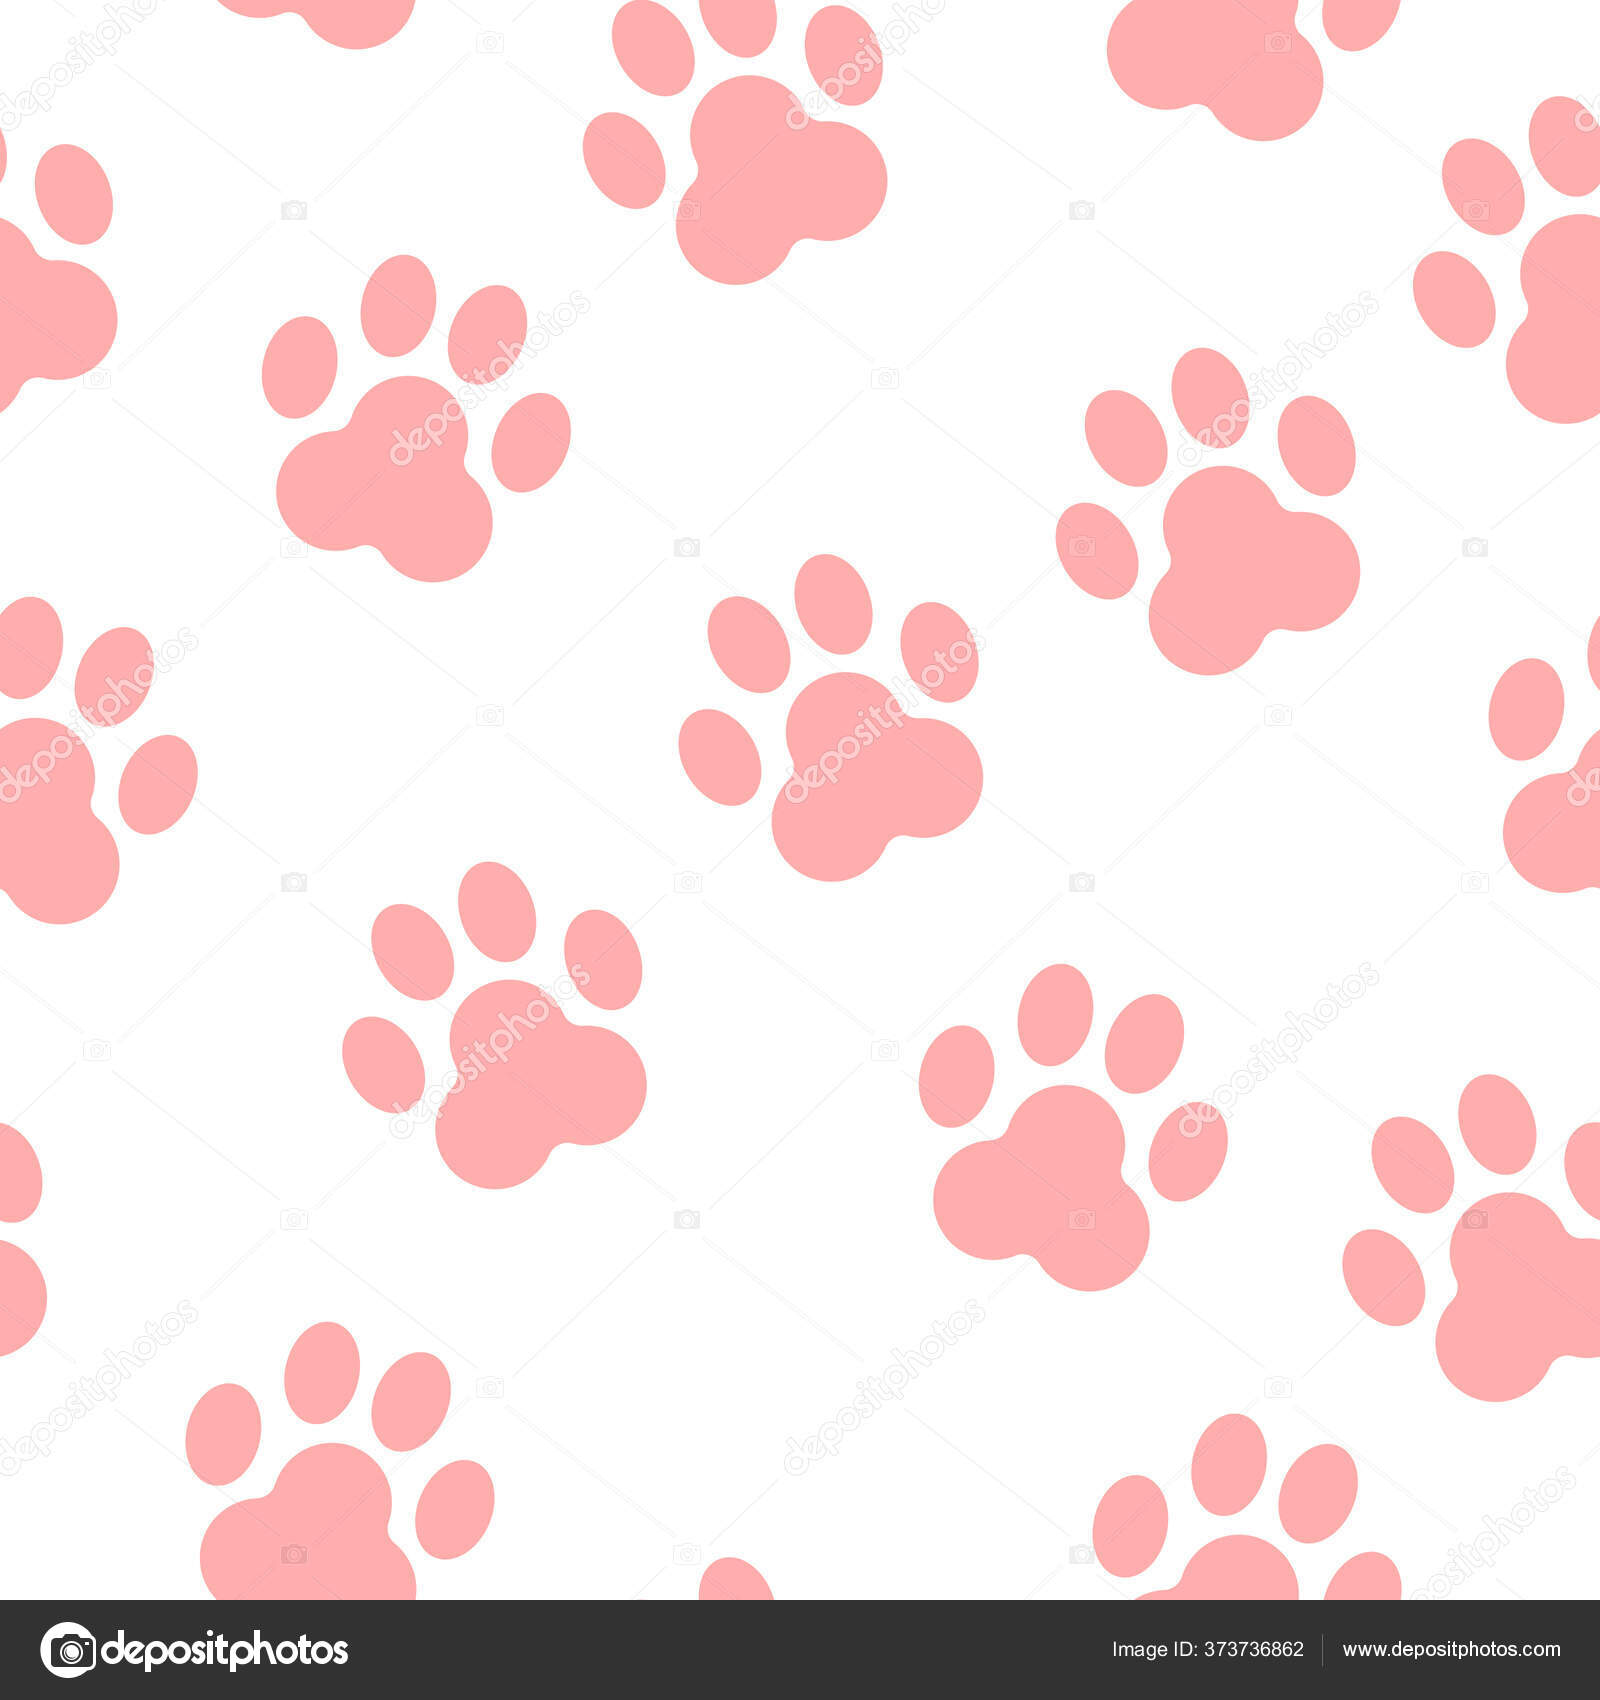 Colorful Quilt Dog Paw Print Drawing Wrapping Paper by Cool Prints